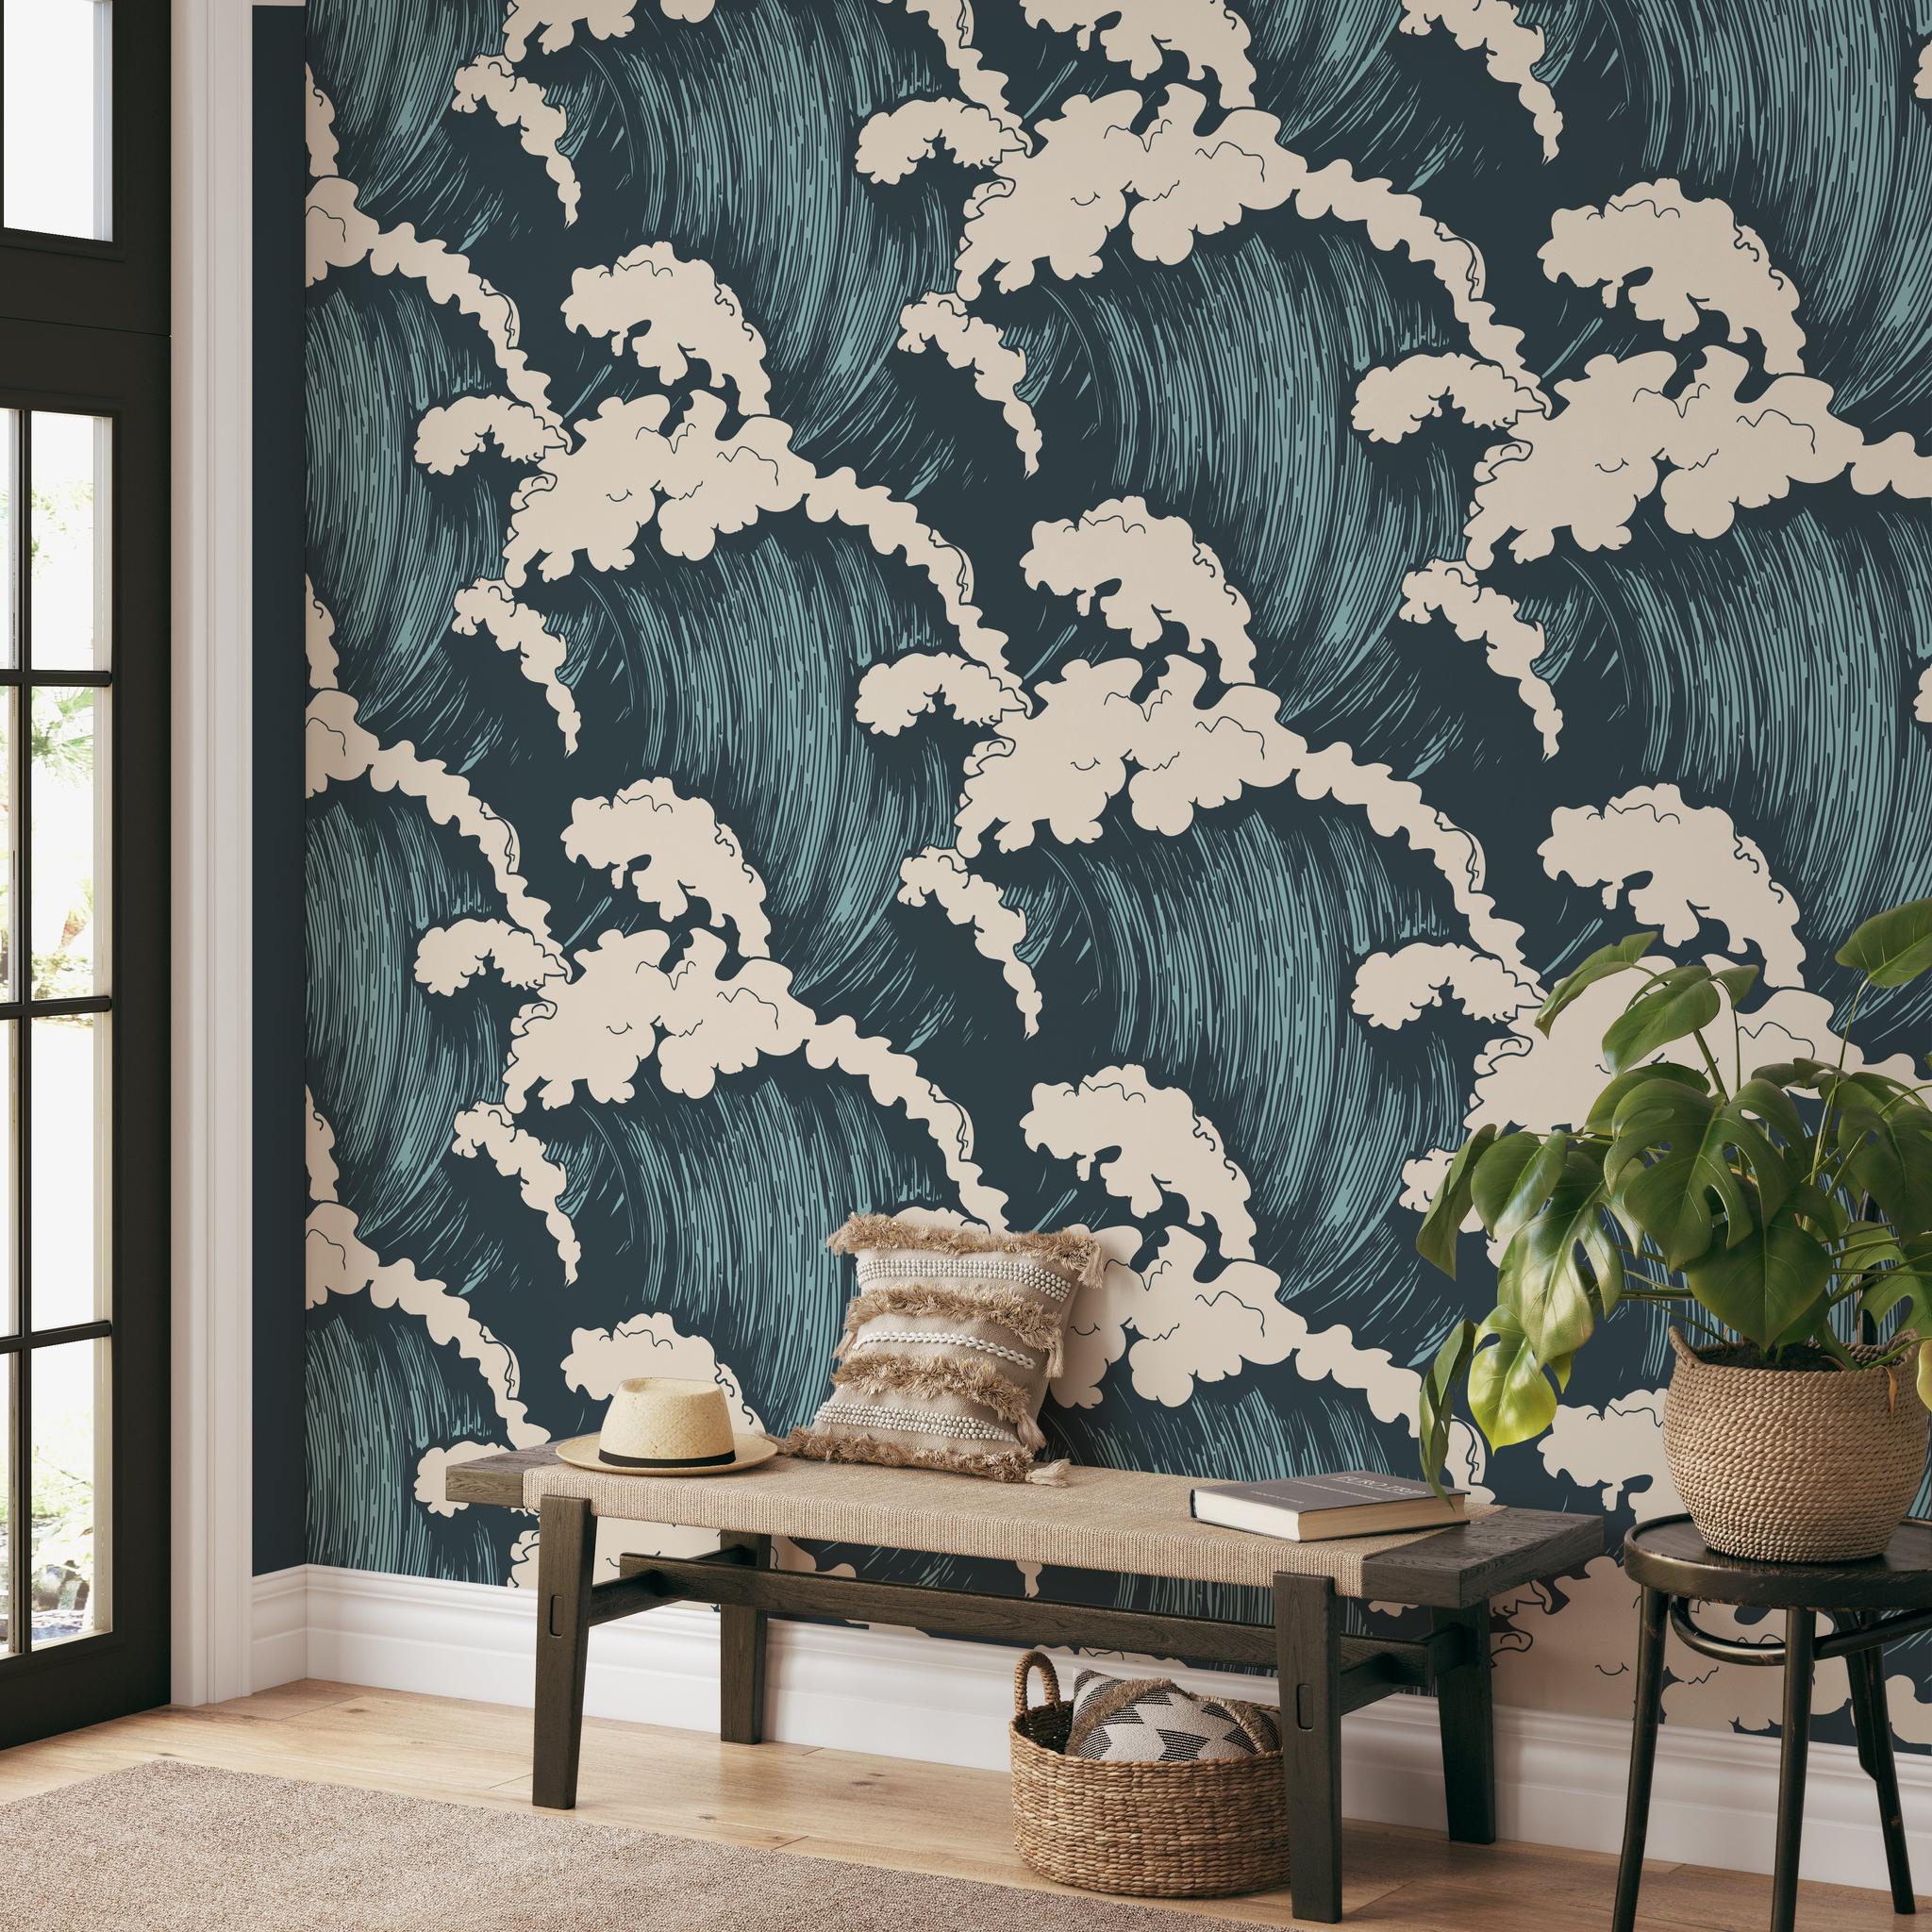 "Maverick Wallpaper by Wall Blush showcasing a stylish design in a modern living room setting, with a focus on the elegant pattern."